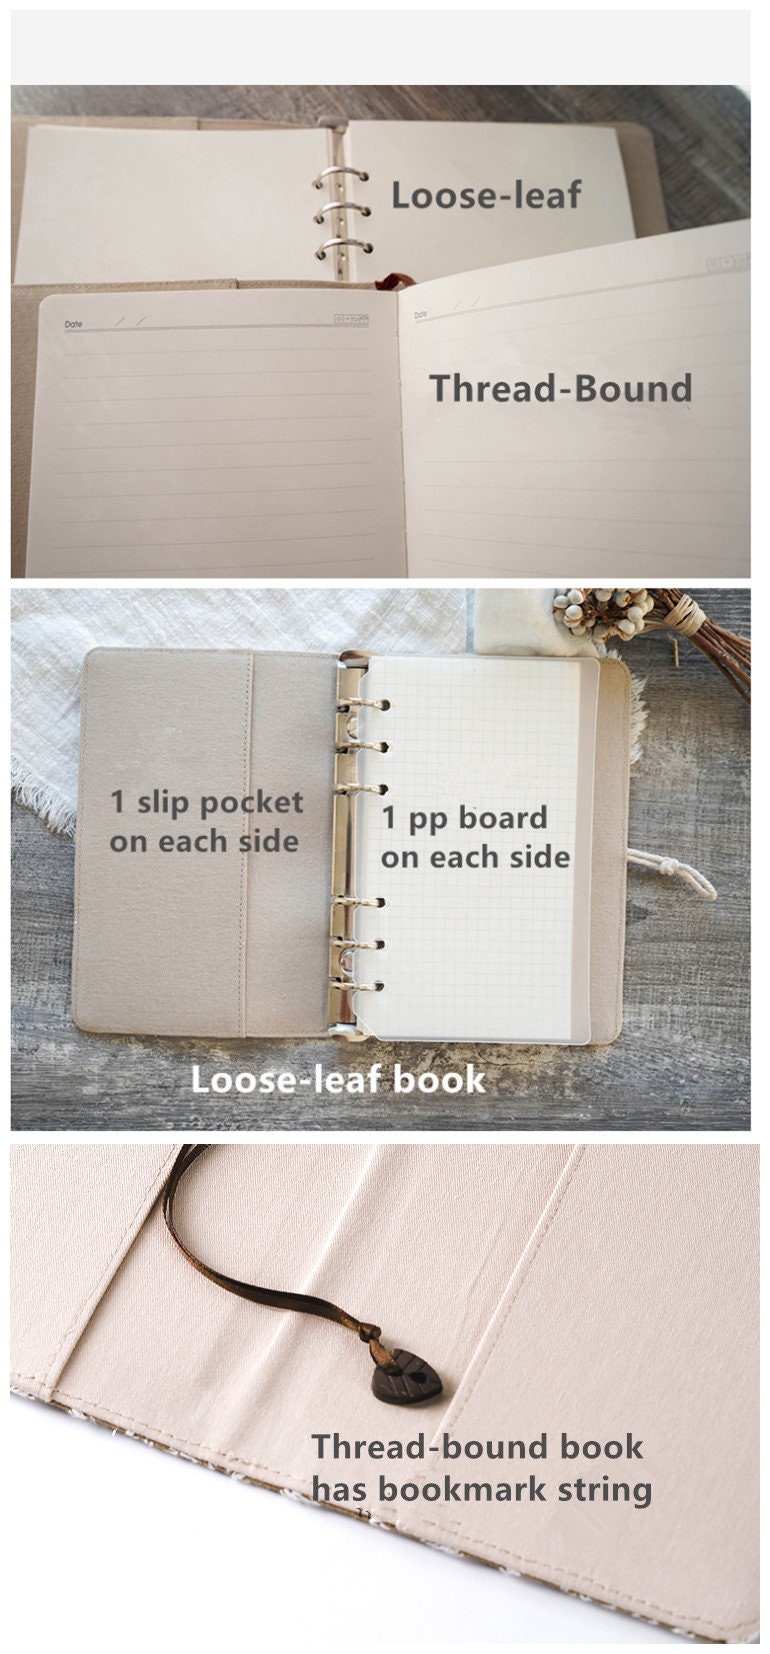 Retro Woolen Cloth Cover Handmade Journal Notebook A5 A6 loose-leaf thread-bound Embroidery Book Literary Dairy Book Notepad Unique Gift